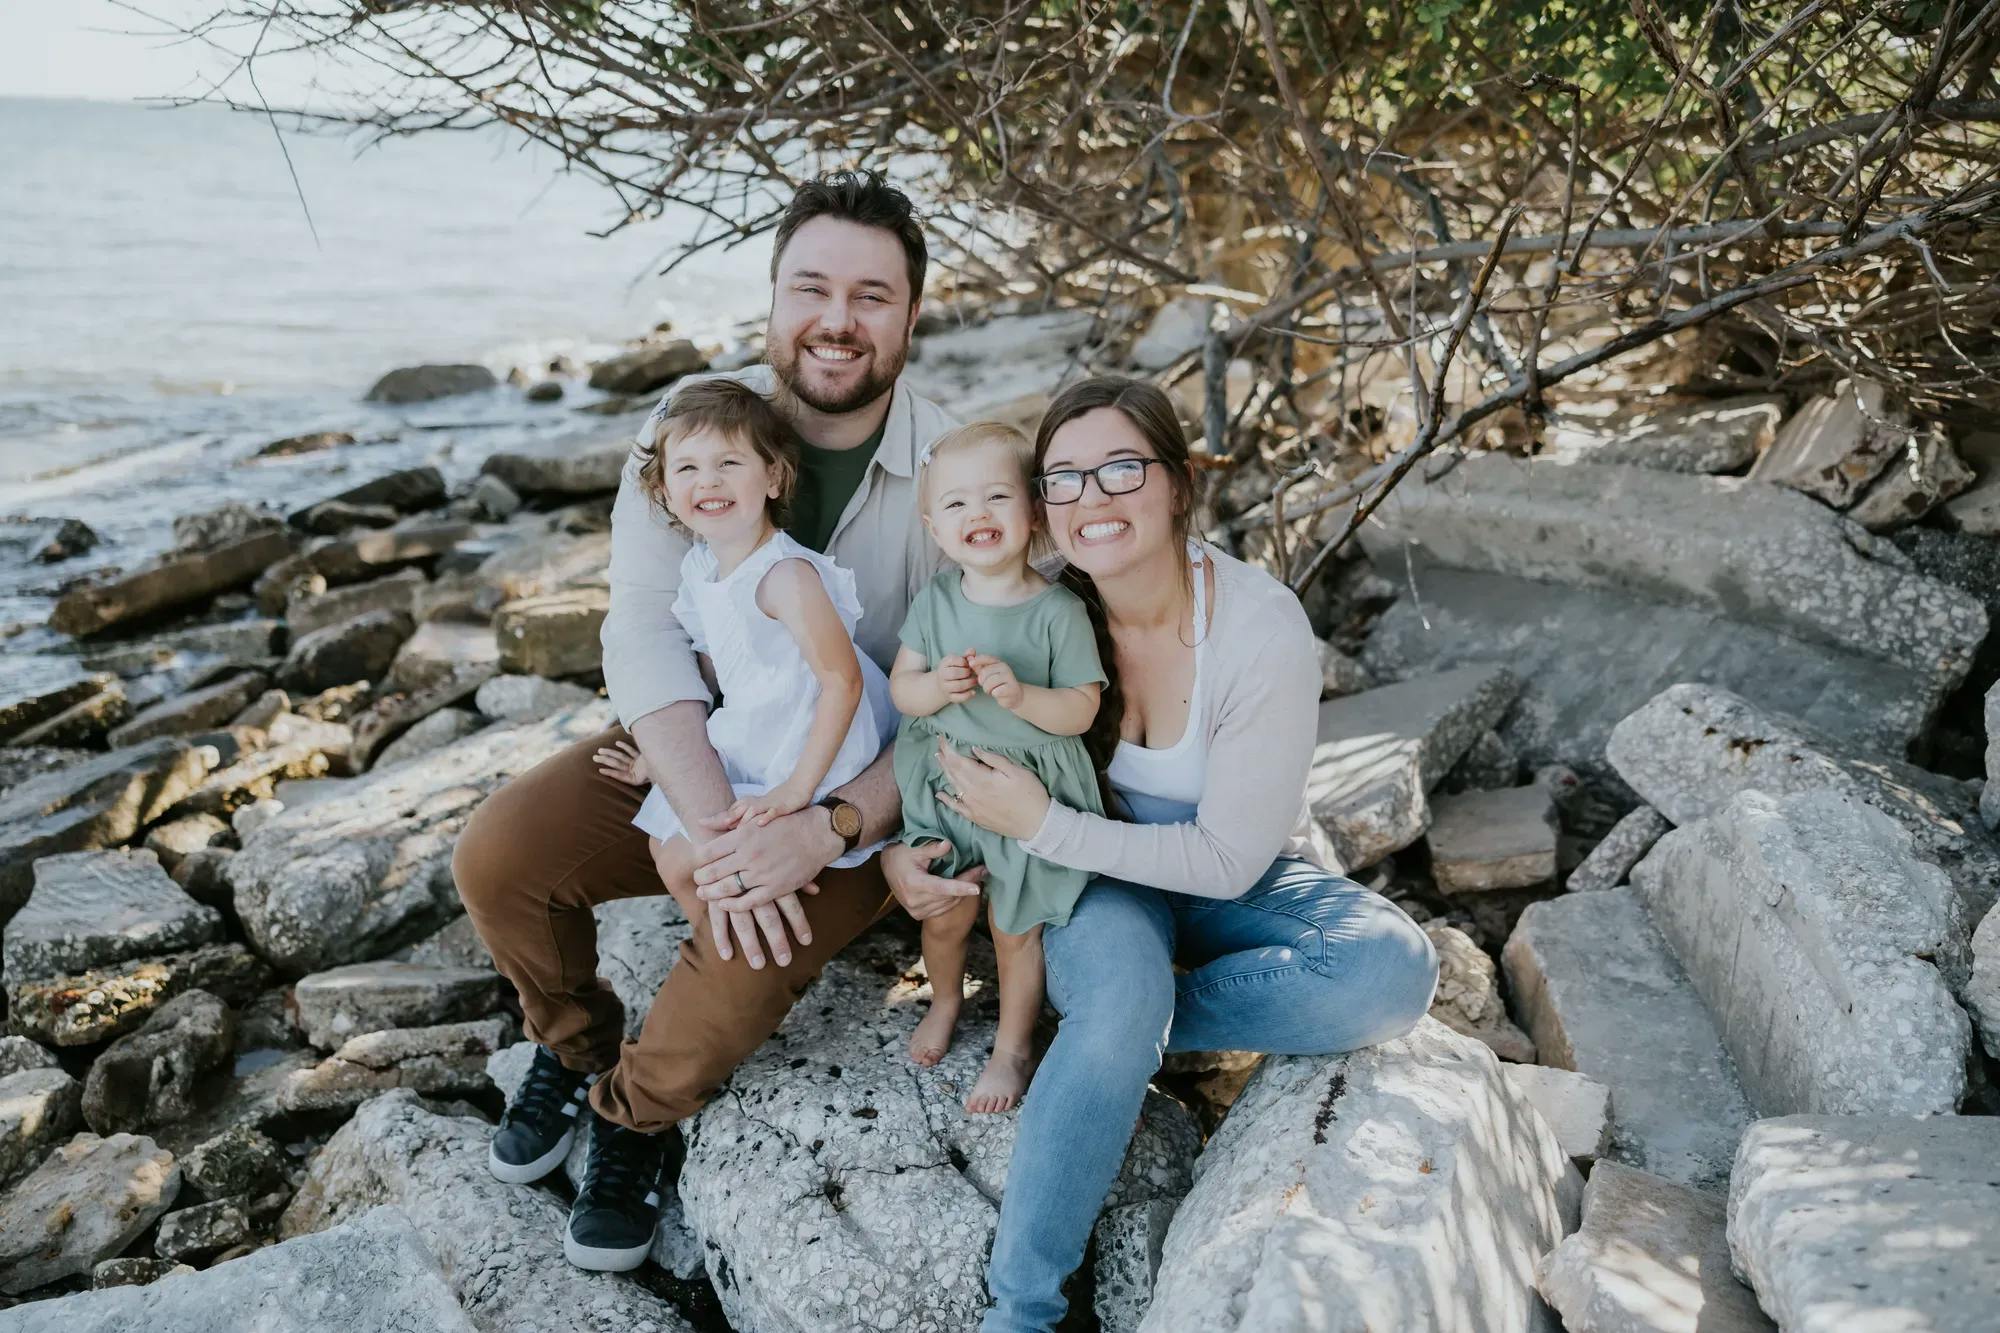 Photo of a dad, mom, and 2 young daughters sitting on rocks overlooking the water